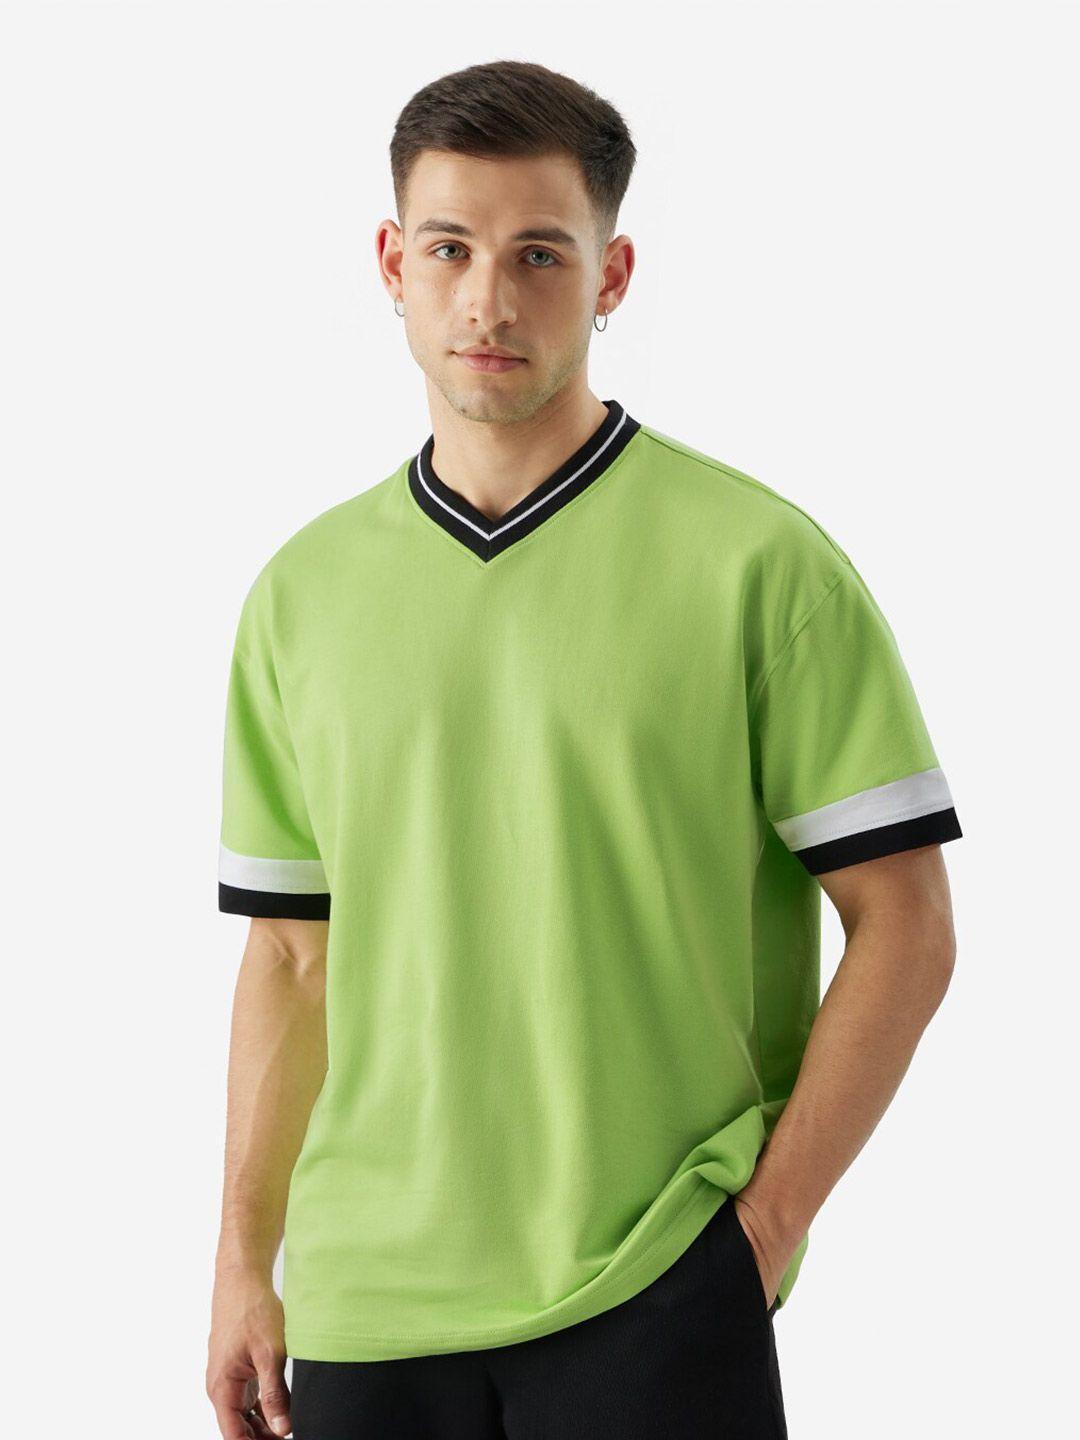 the souled store green v-neck oversized pure cotton t-shirt